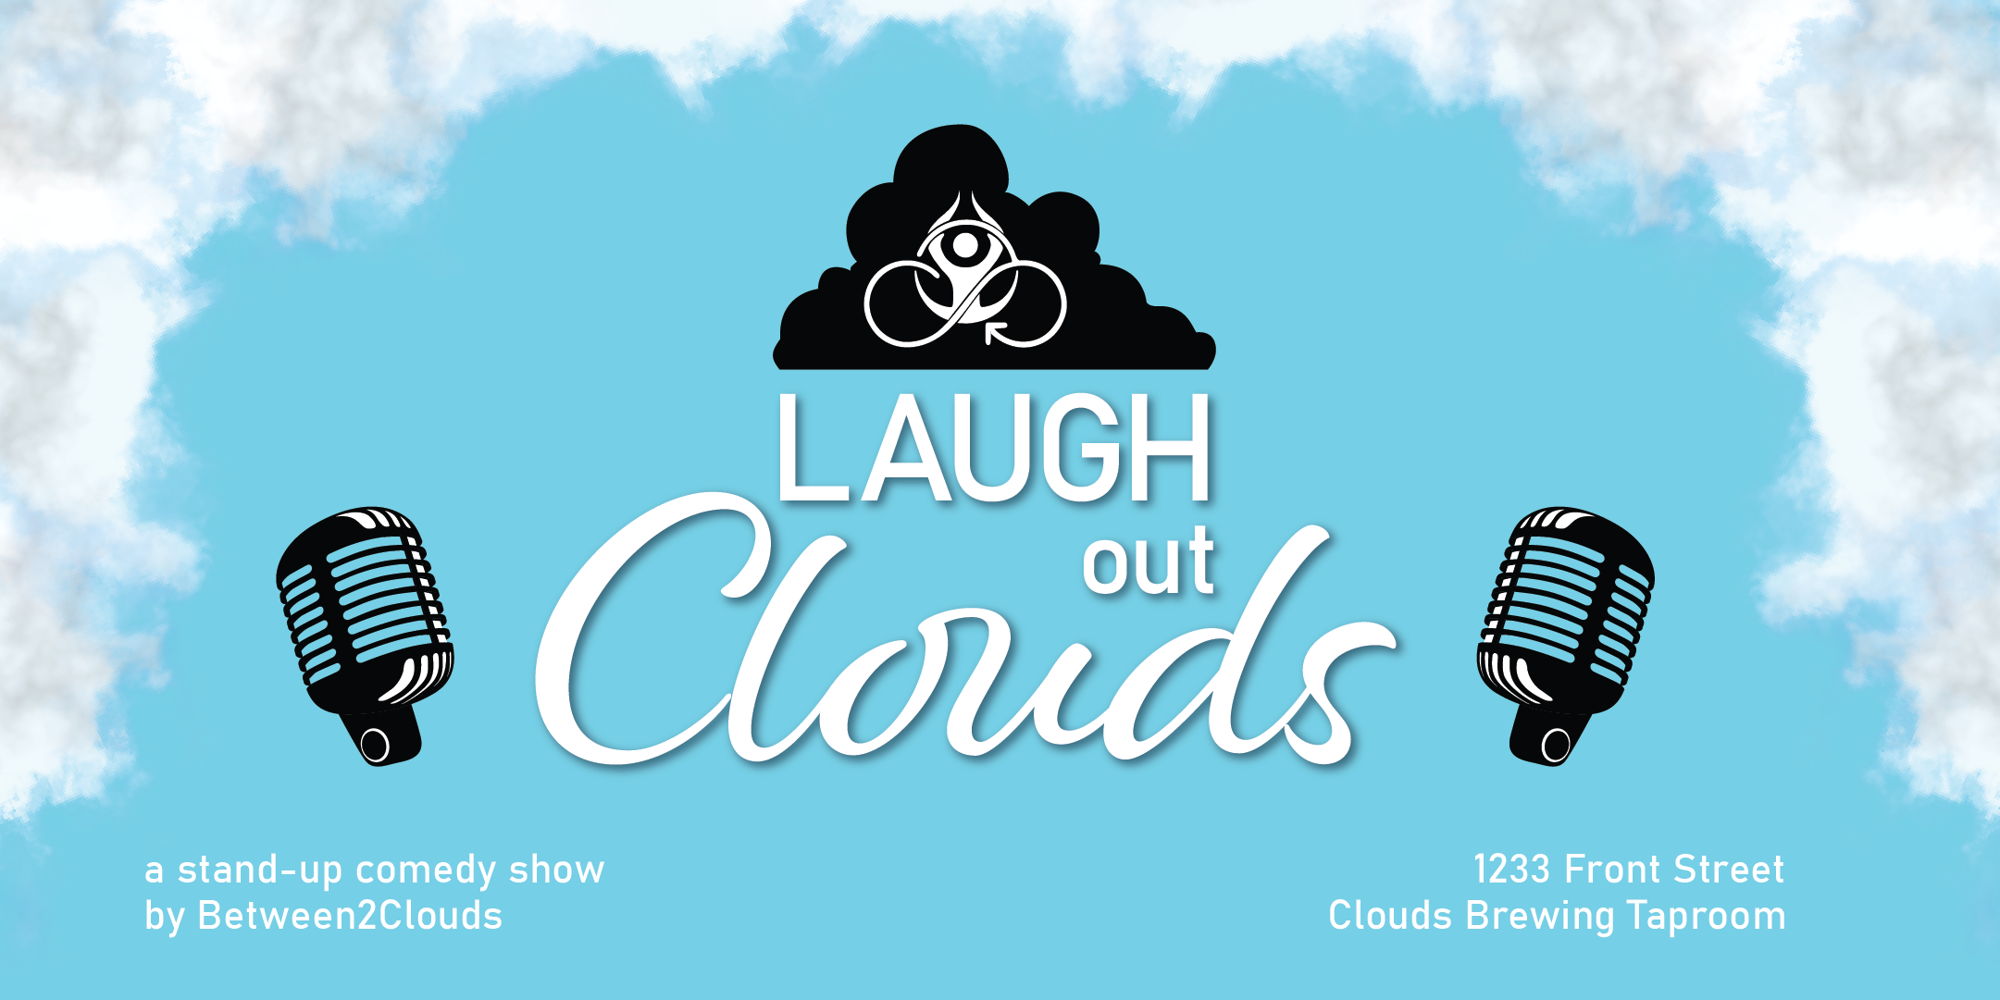 Laugh Out Clouds: a weekly stand up comedy show featuring professional headline comics promotional image